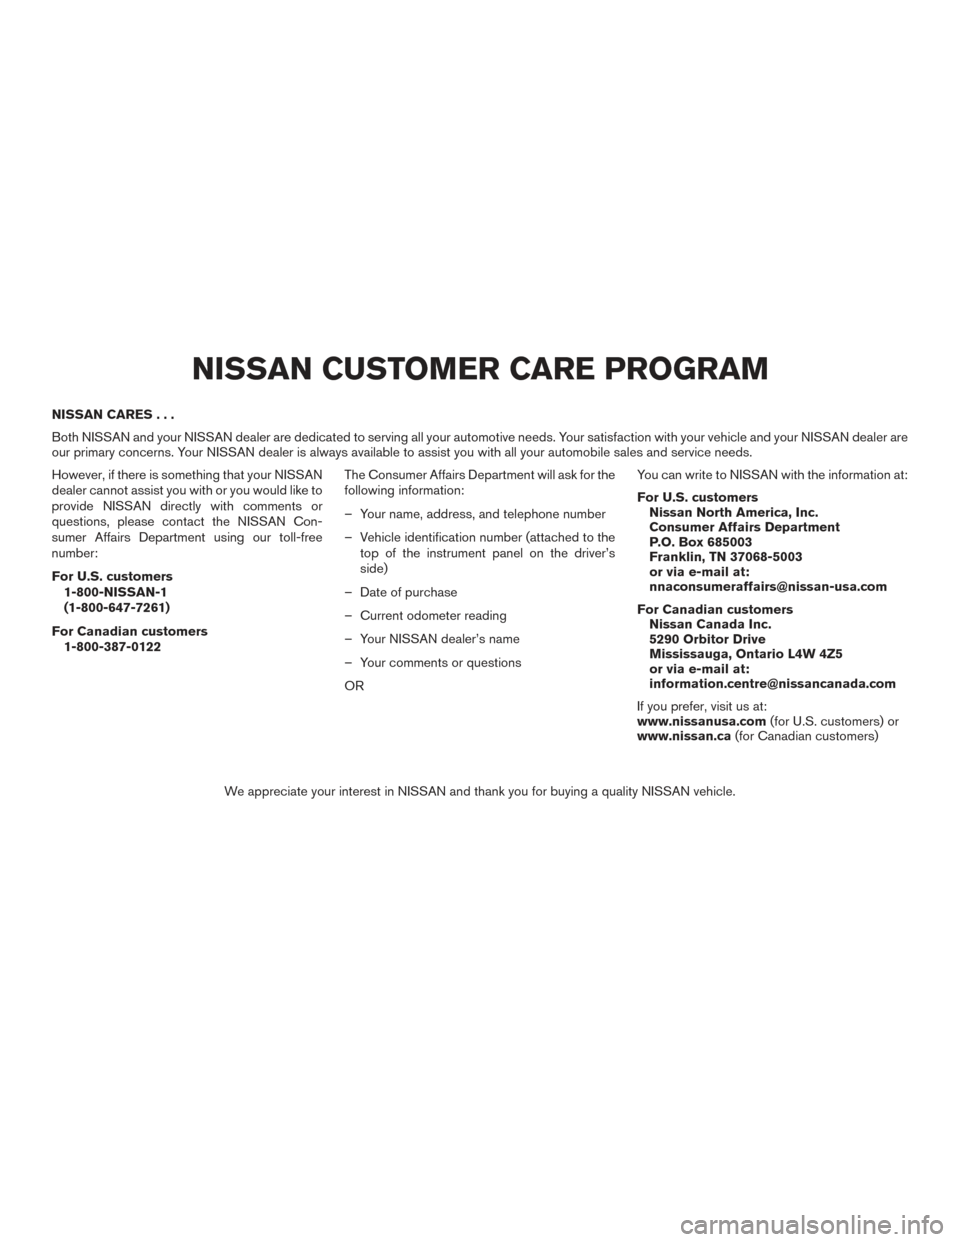 NISSAN SENTRA 2017 B17 / 7.G Owners Manual NISSAN CARES...
Both NISSAN and your NISSAN dealer are dedicated to serving all your automotive needs. Your satisfaction with your vehicle and your NISSAN dealer are
our primary concerns. Your NISSAN 